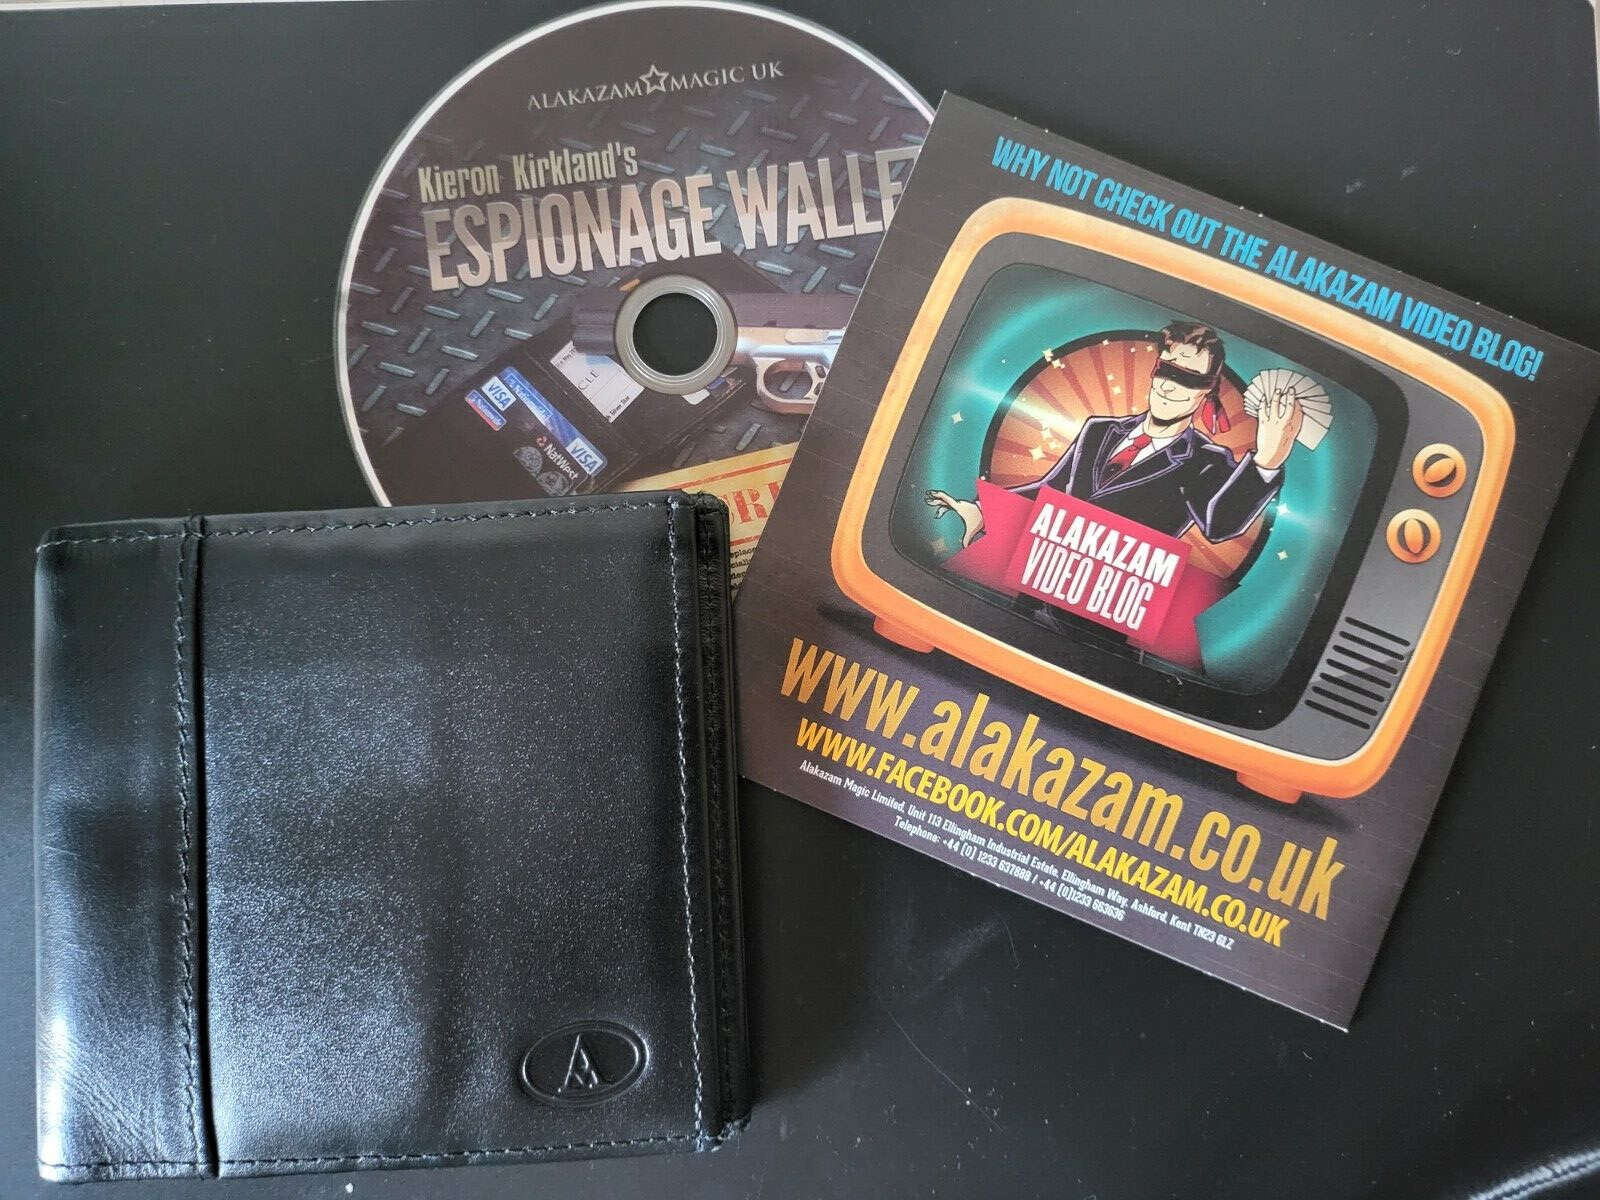 Espionage wallet by Alakazam with DVD and rear view of box